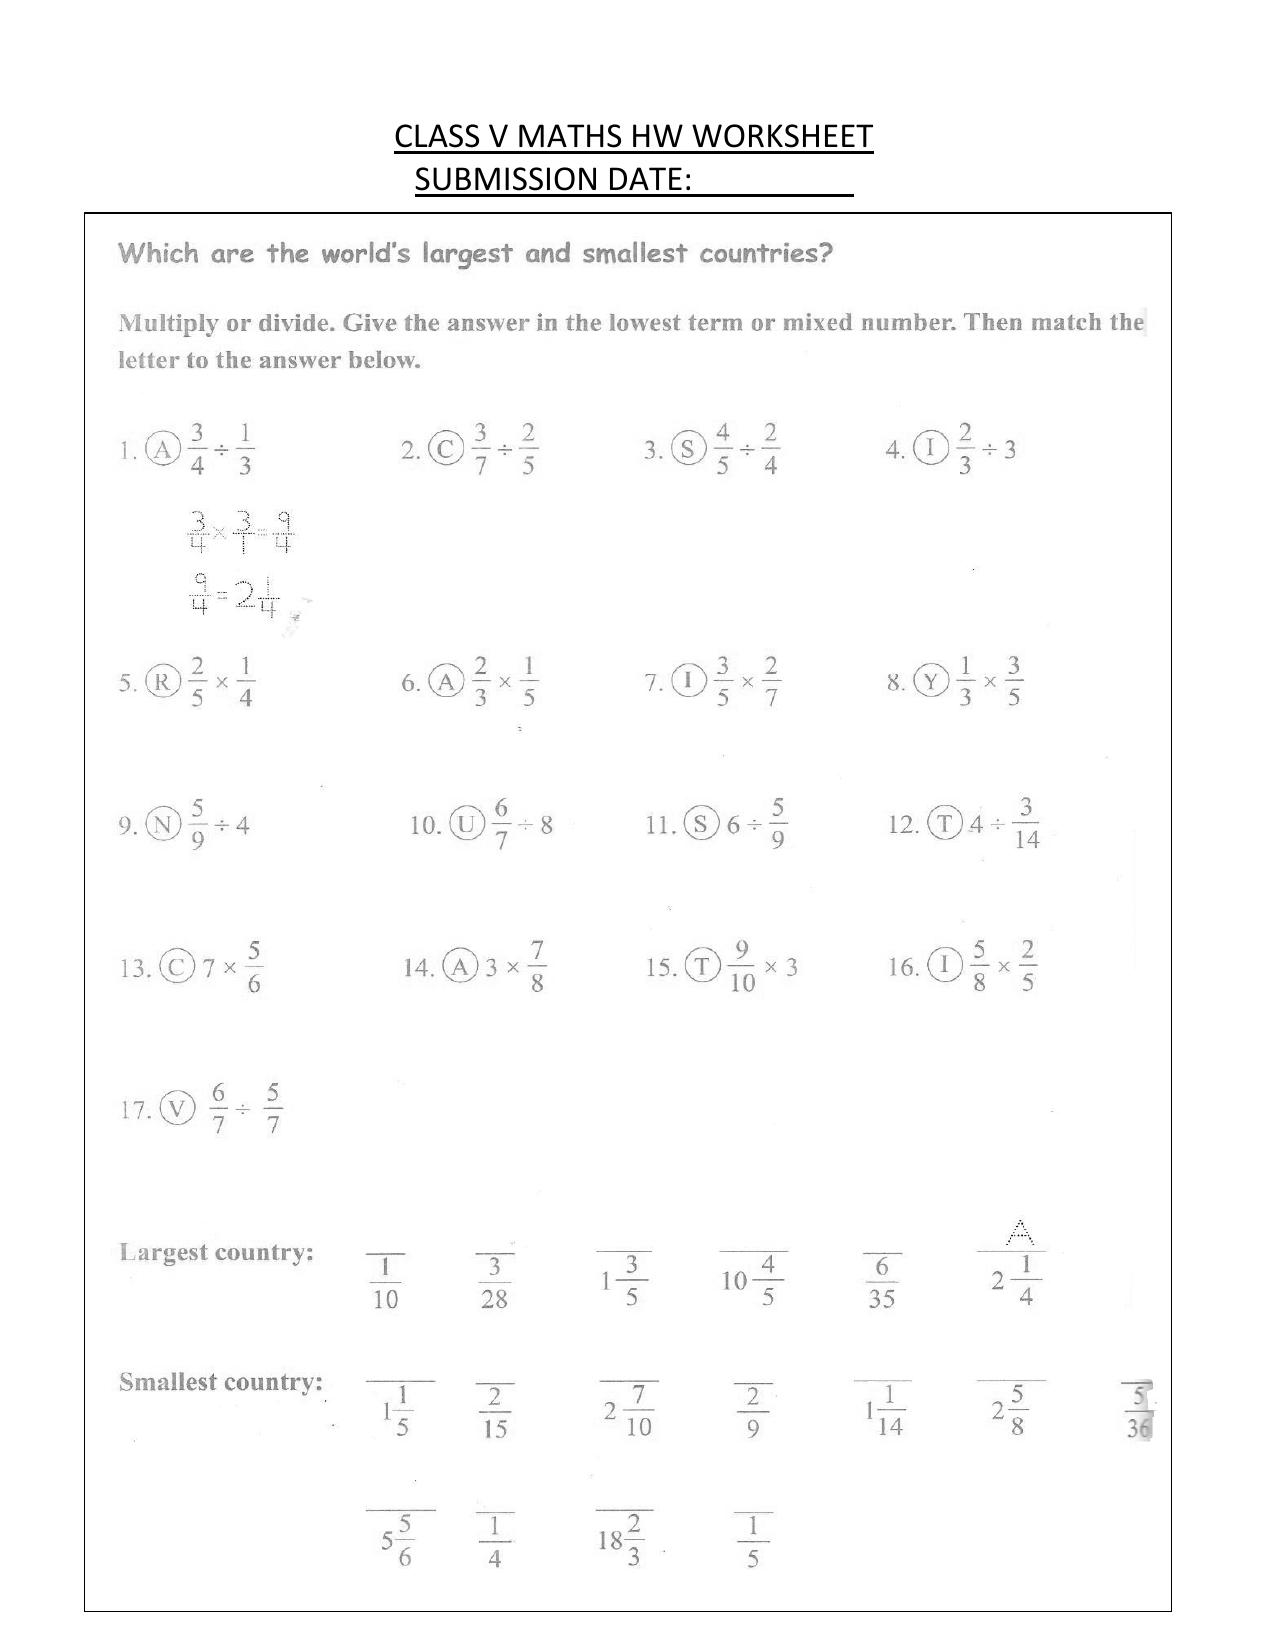 Worksheet for Class 5 Maths Fractions Assignment 5 - Page 1